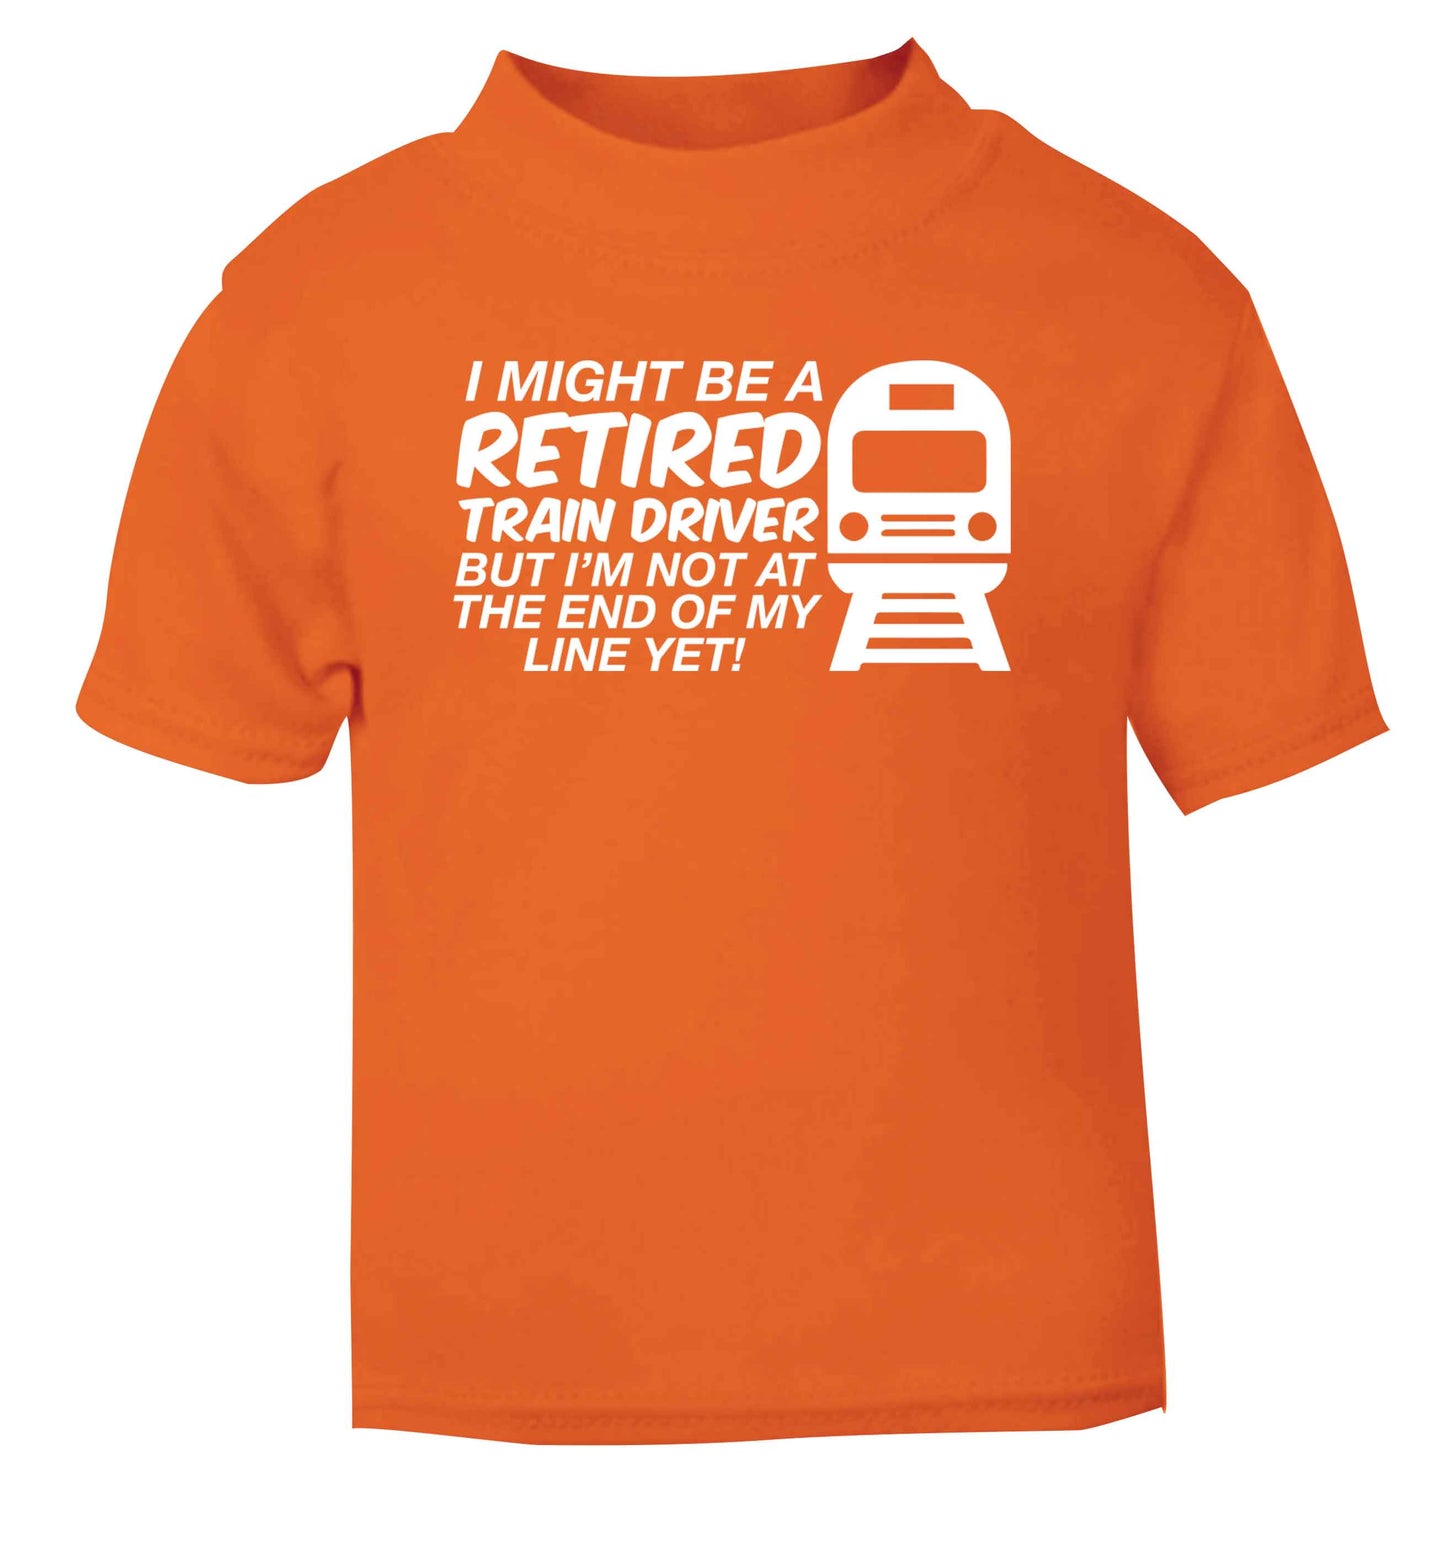 Retired train driver but I'm not at the end of my line yet orange Baby Toddler Tshirt 2 Years